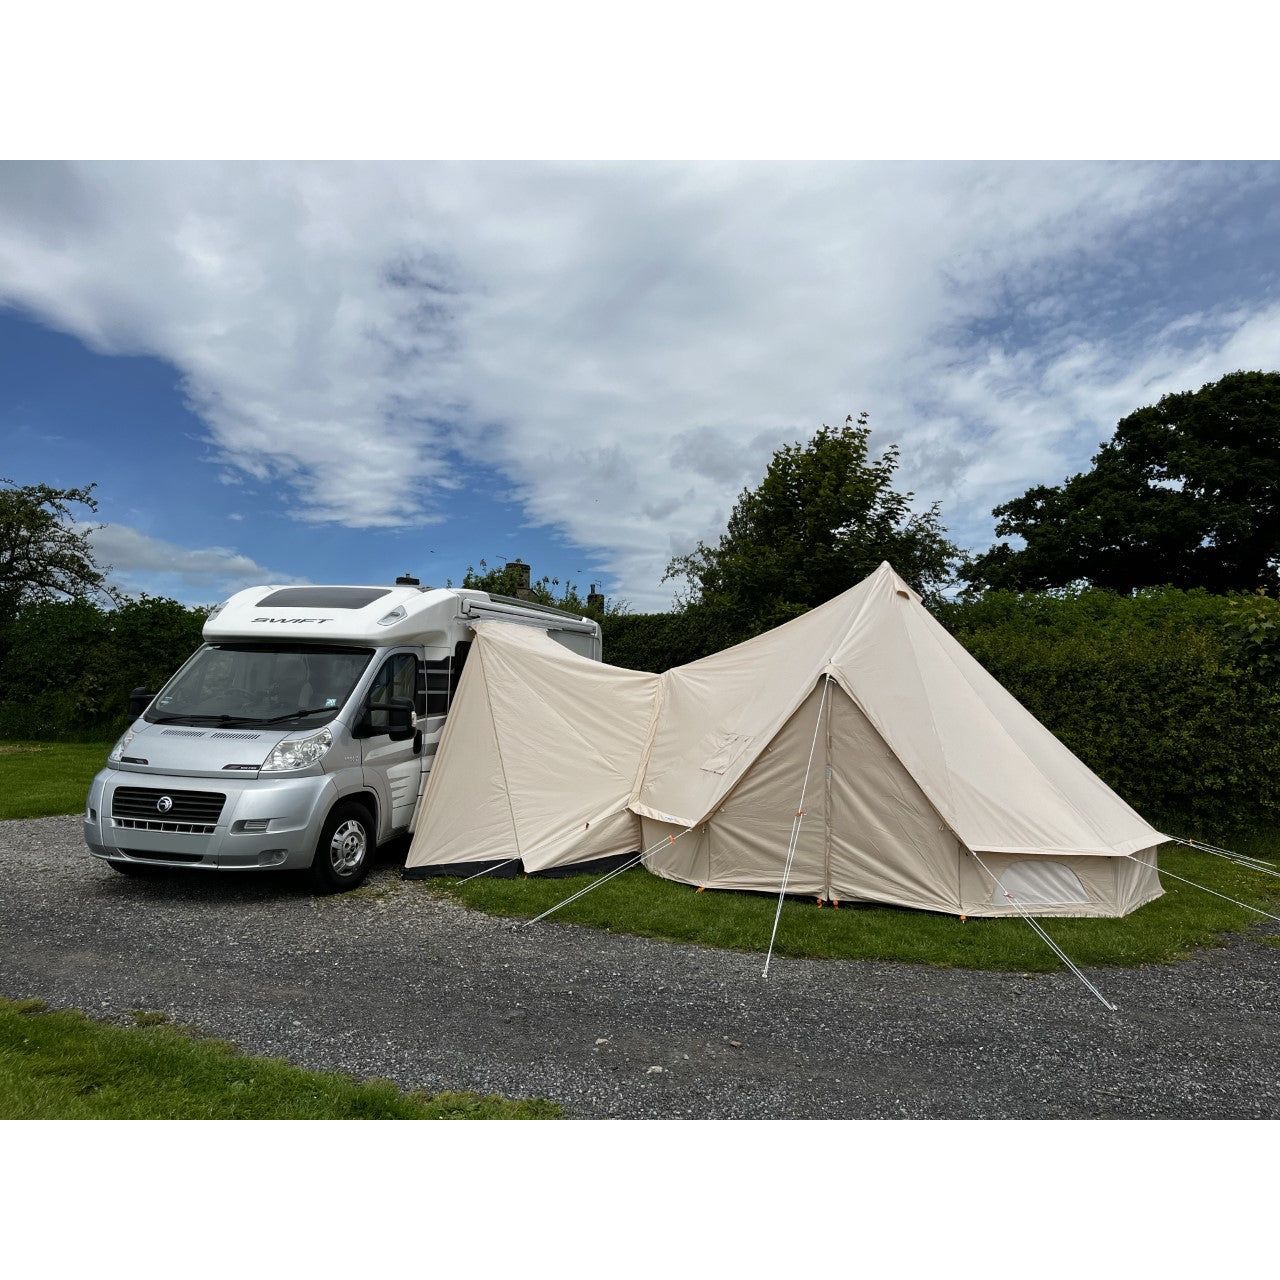 Glawning HT Deluxe High Connection 5 Metre, 2 Door Driveaway Awning ON BACKORDER UNTIL 2024